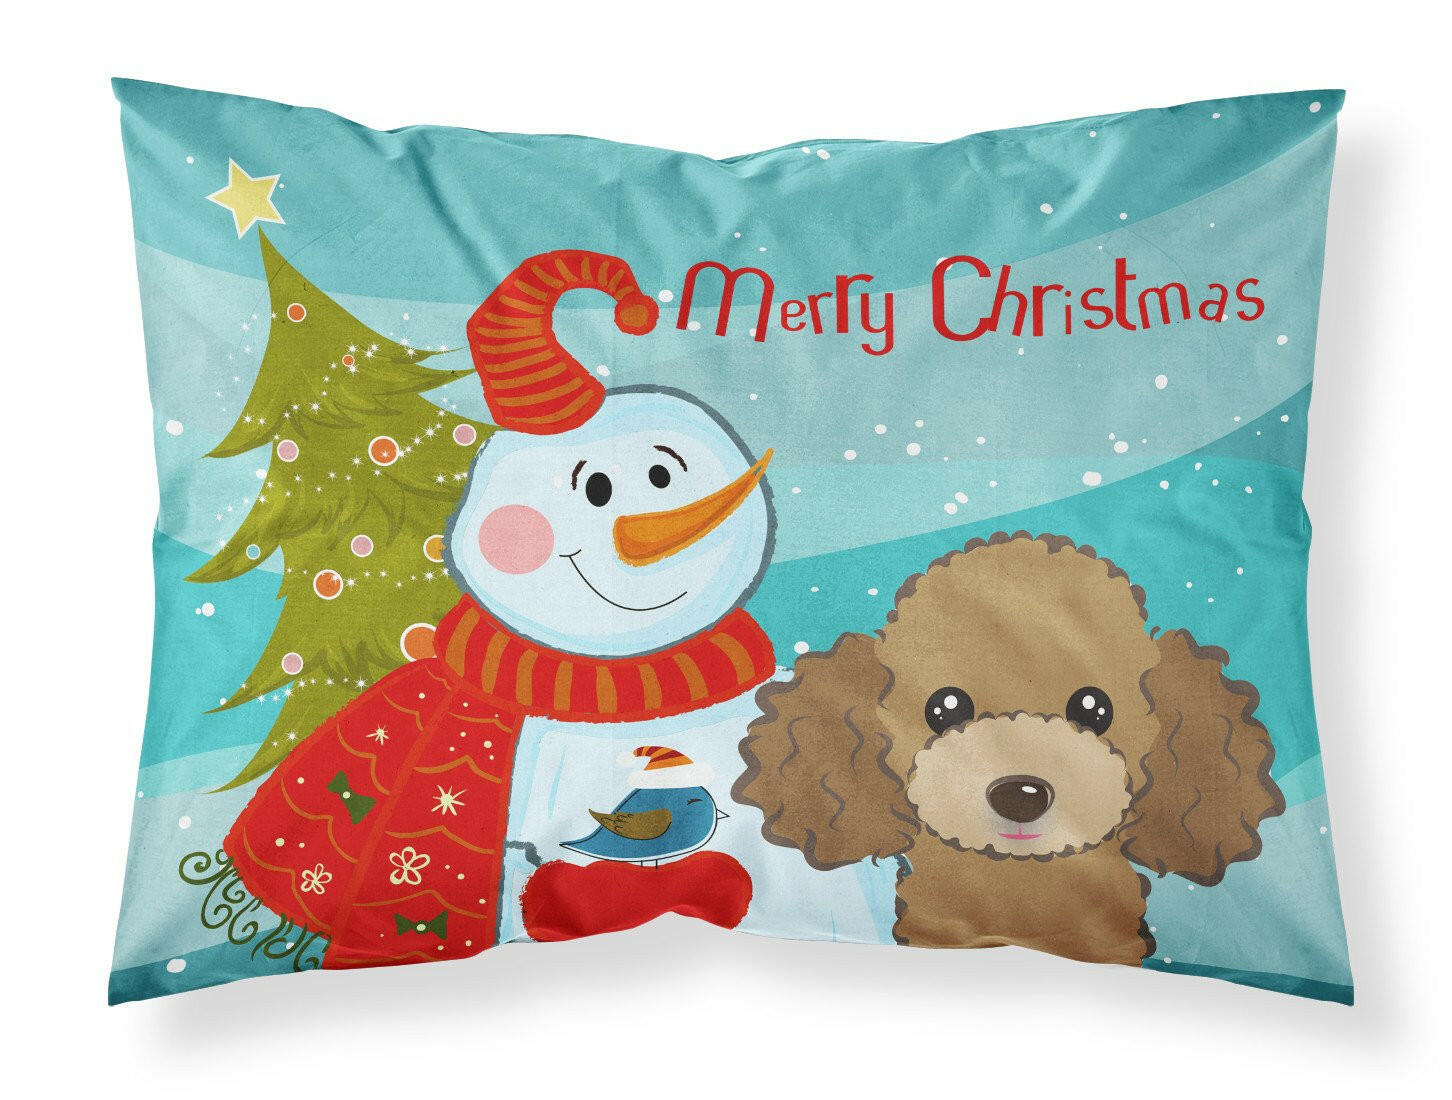 Snowman with Chocolate Brown Poodle Fabric Standard Pillowcase BB1876PILLOWCASE by Caroline's Treasures